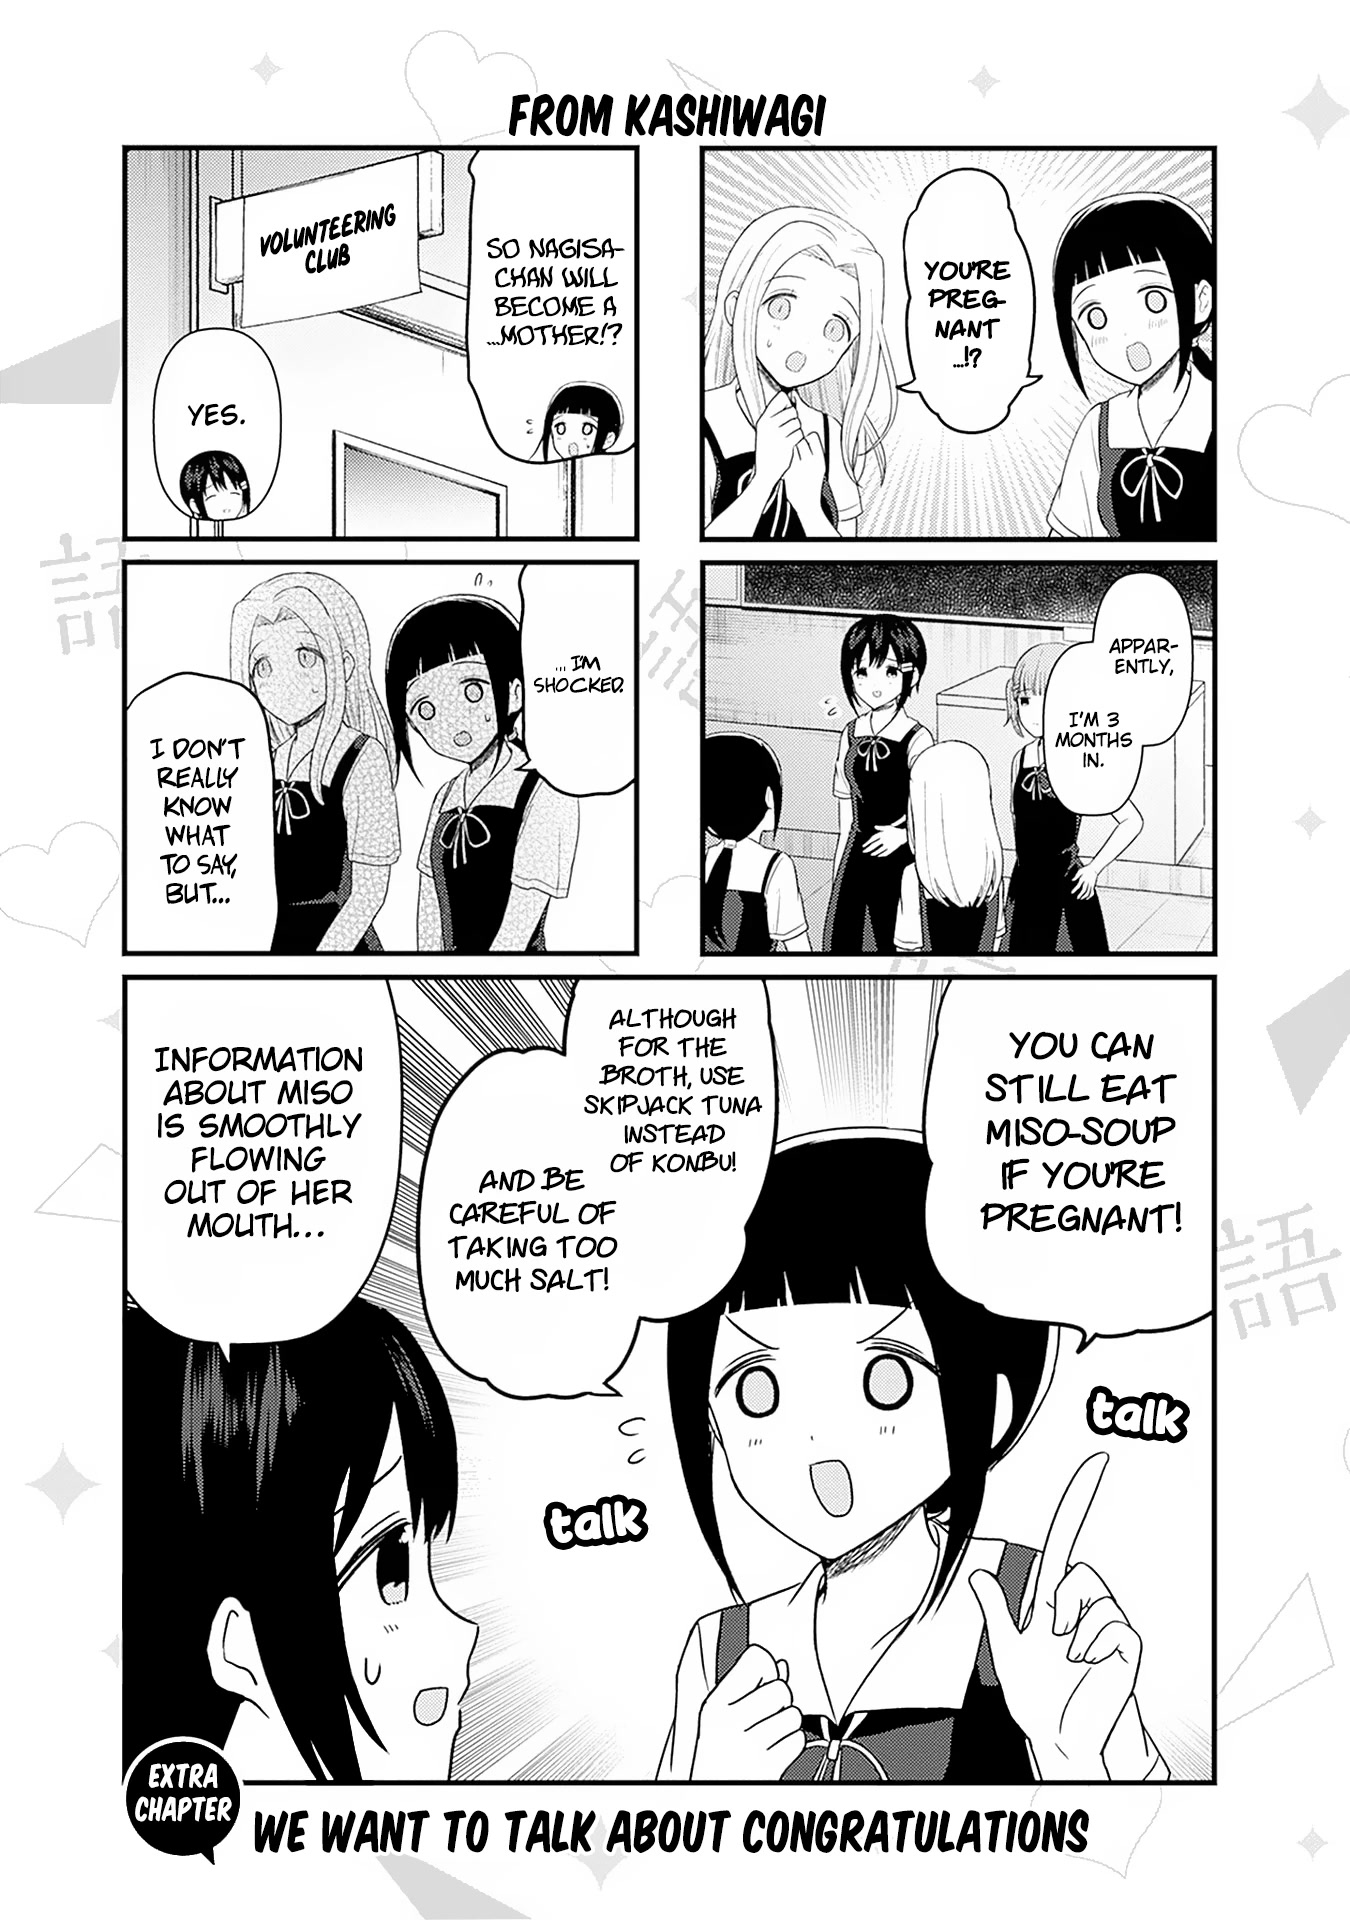 We Want To Talk About Kaguya - Page 2